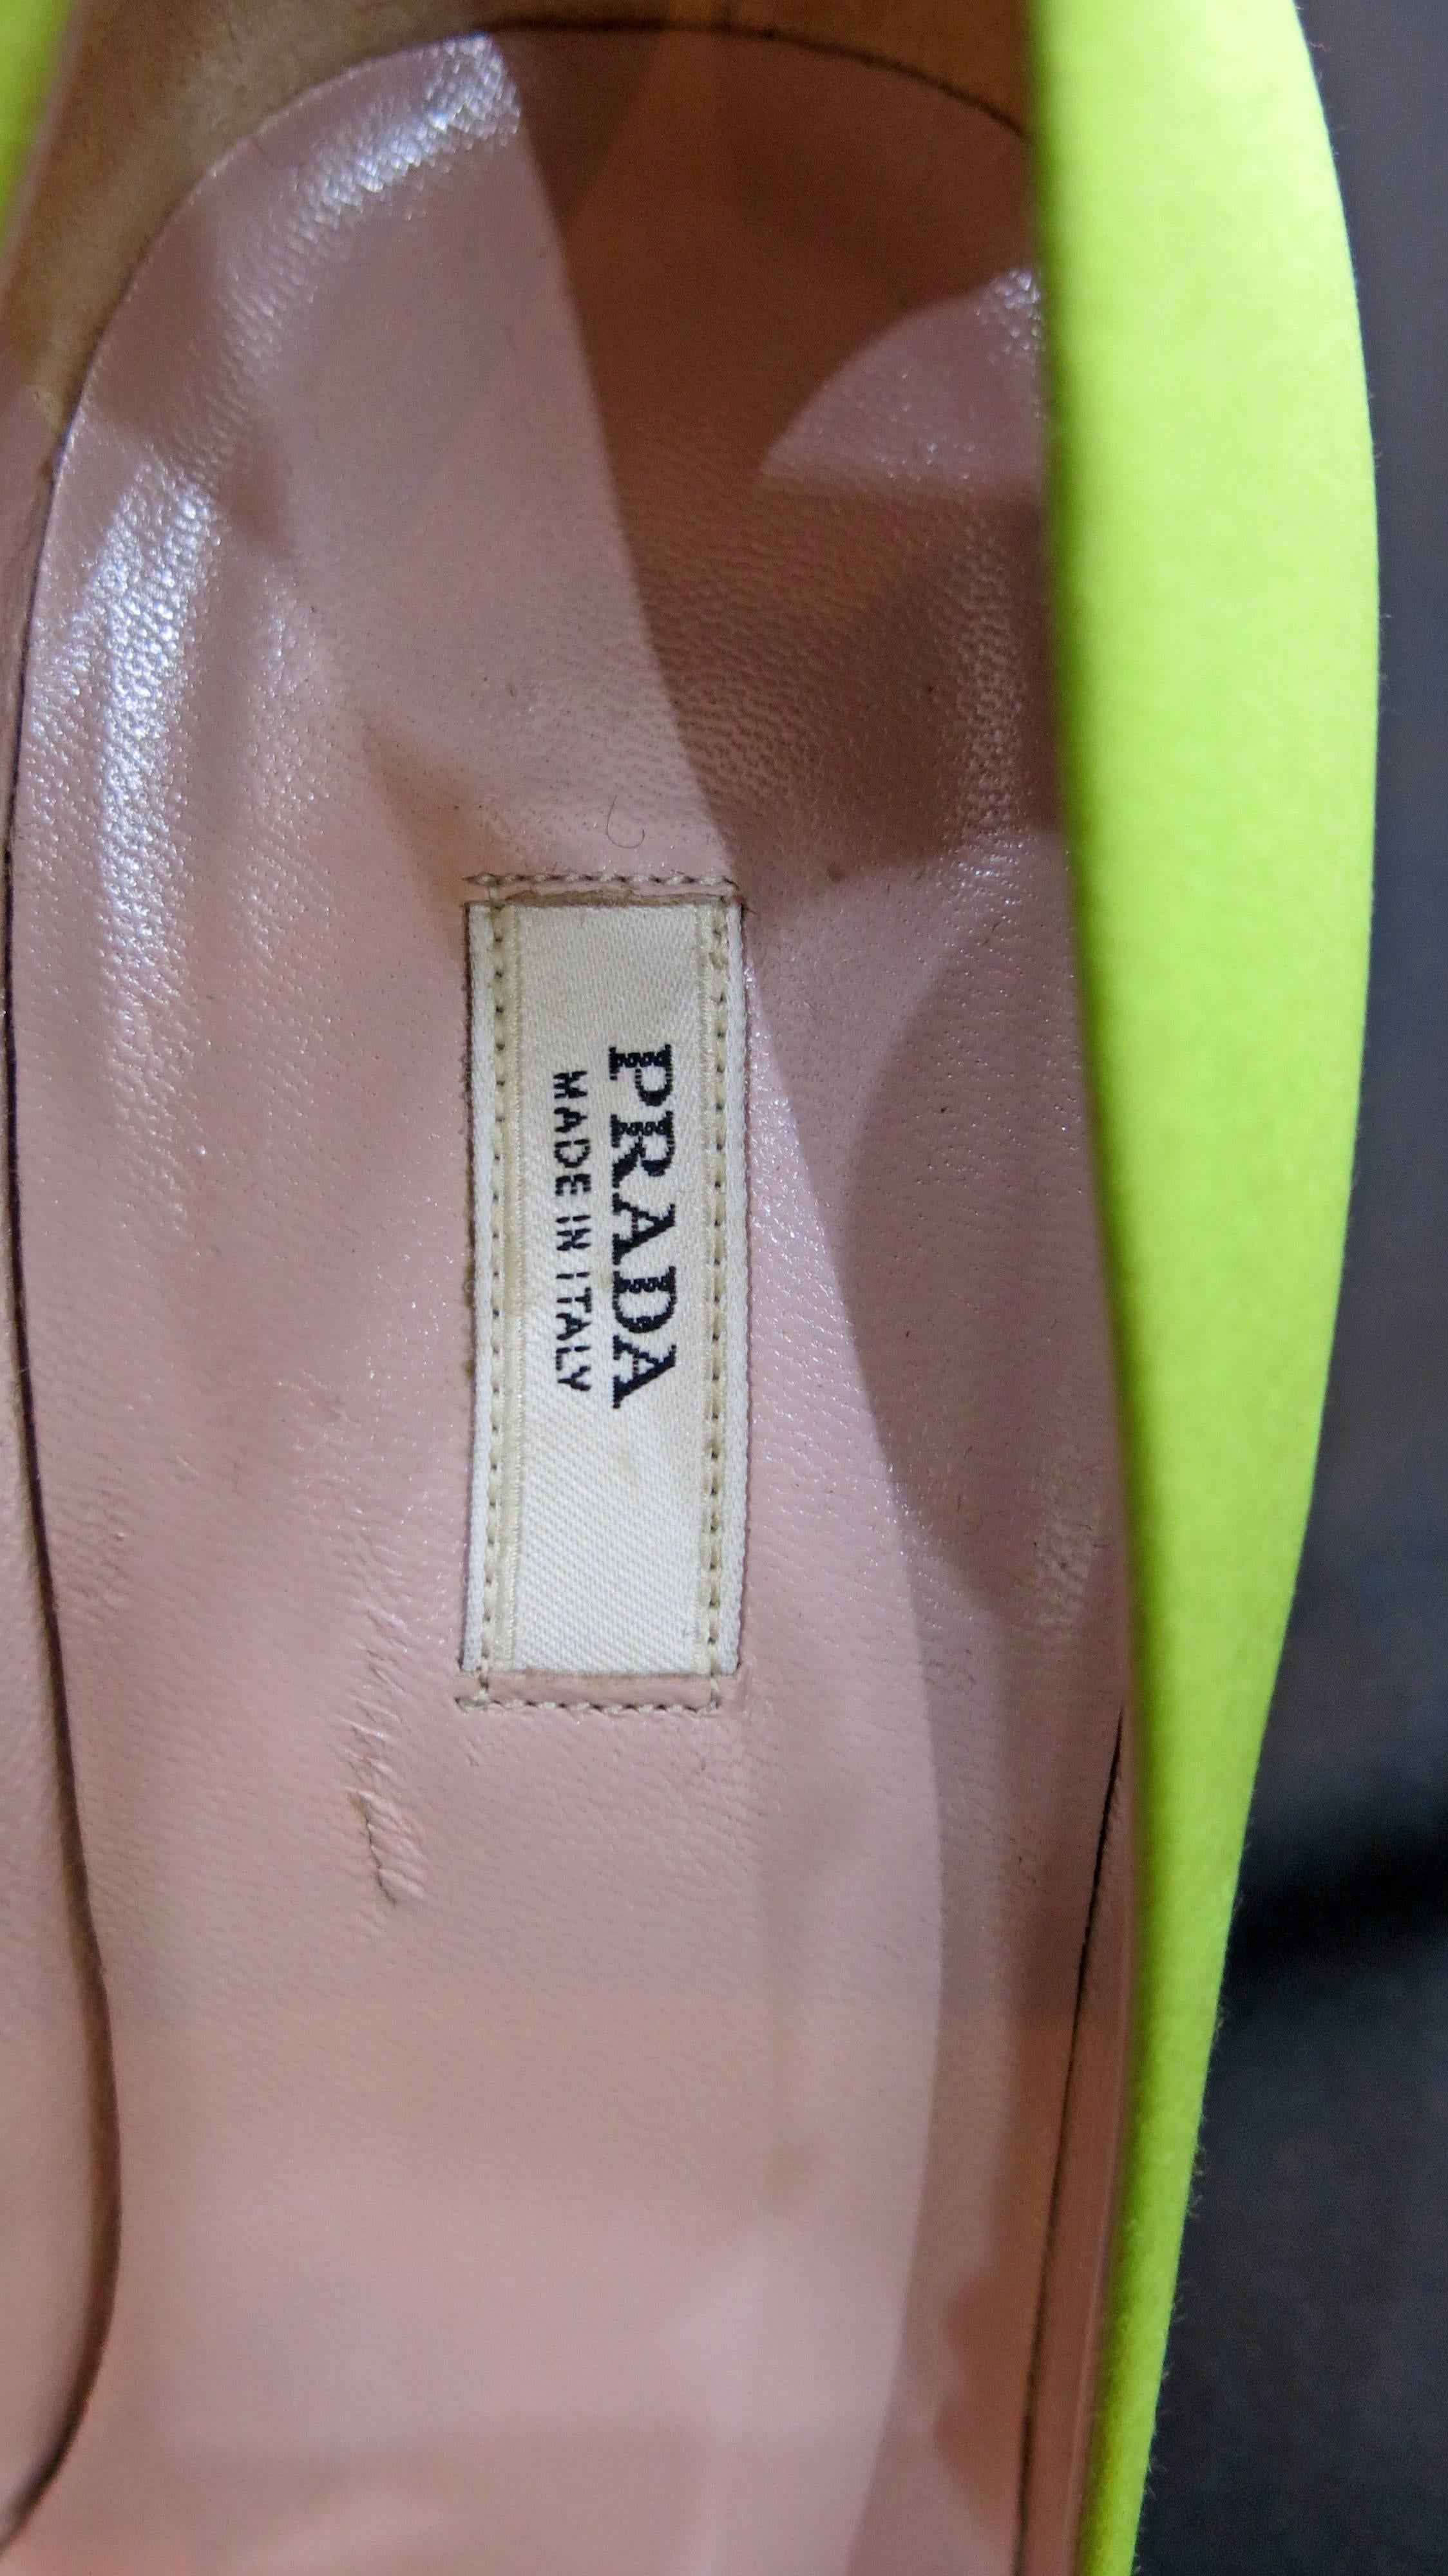 Prada Green Satin Alligator Toe Pumps Size 37.5 In Excellent Condition For Sale In Brooklyn, NY